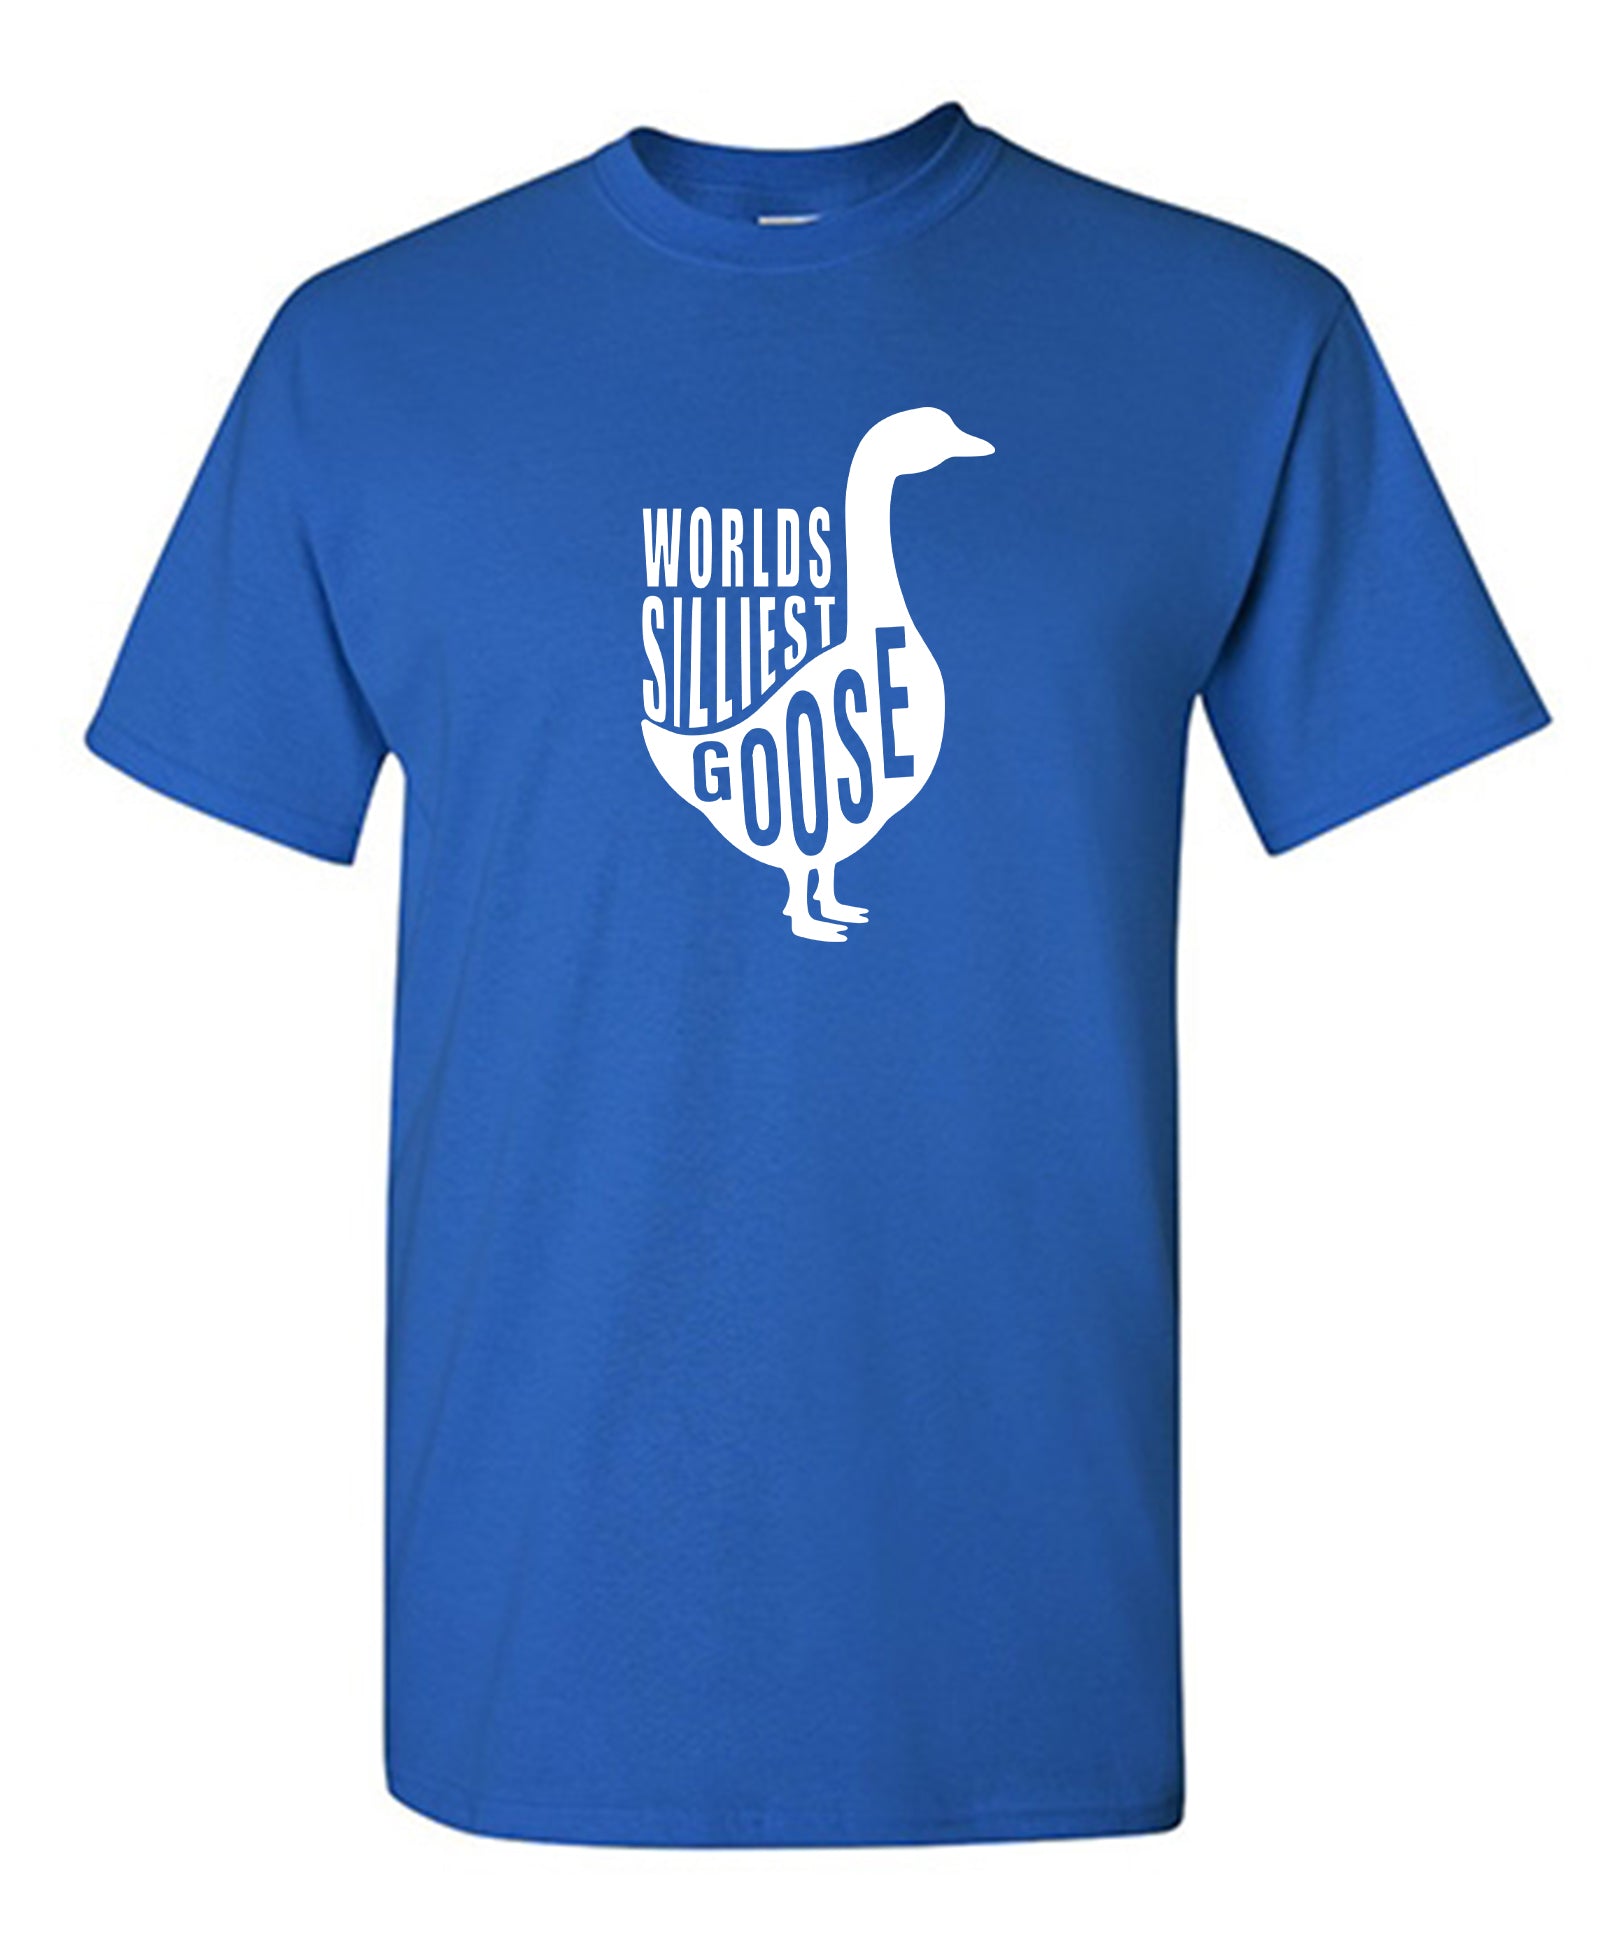 Worlds Silliest Goose - Funny T Shirts & Graphic Tees